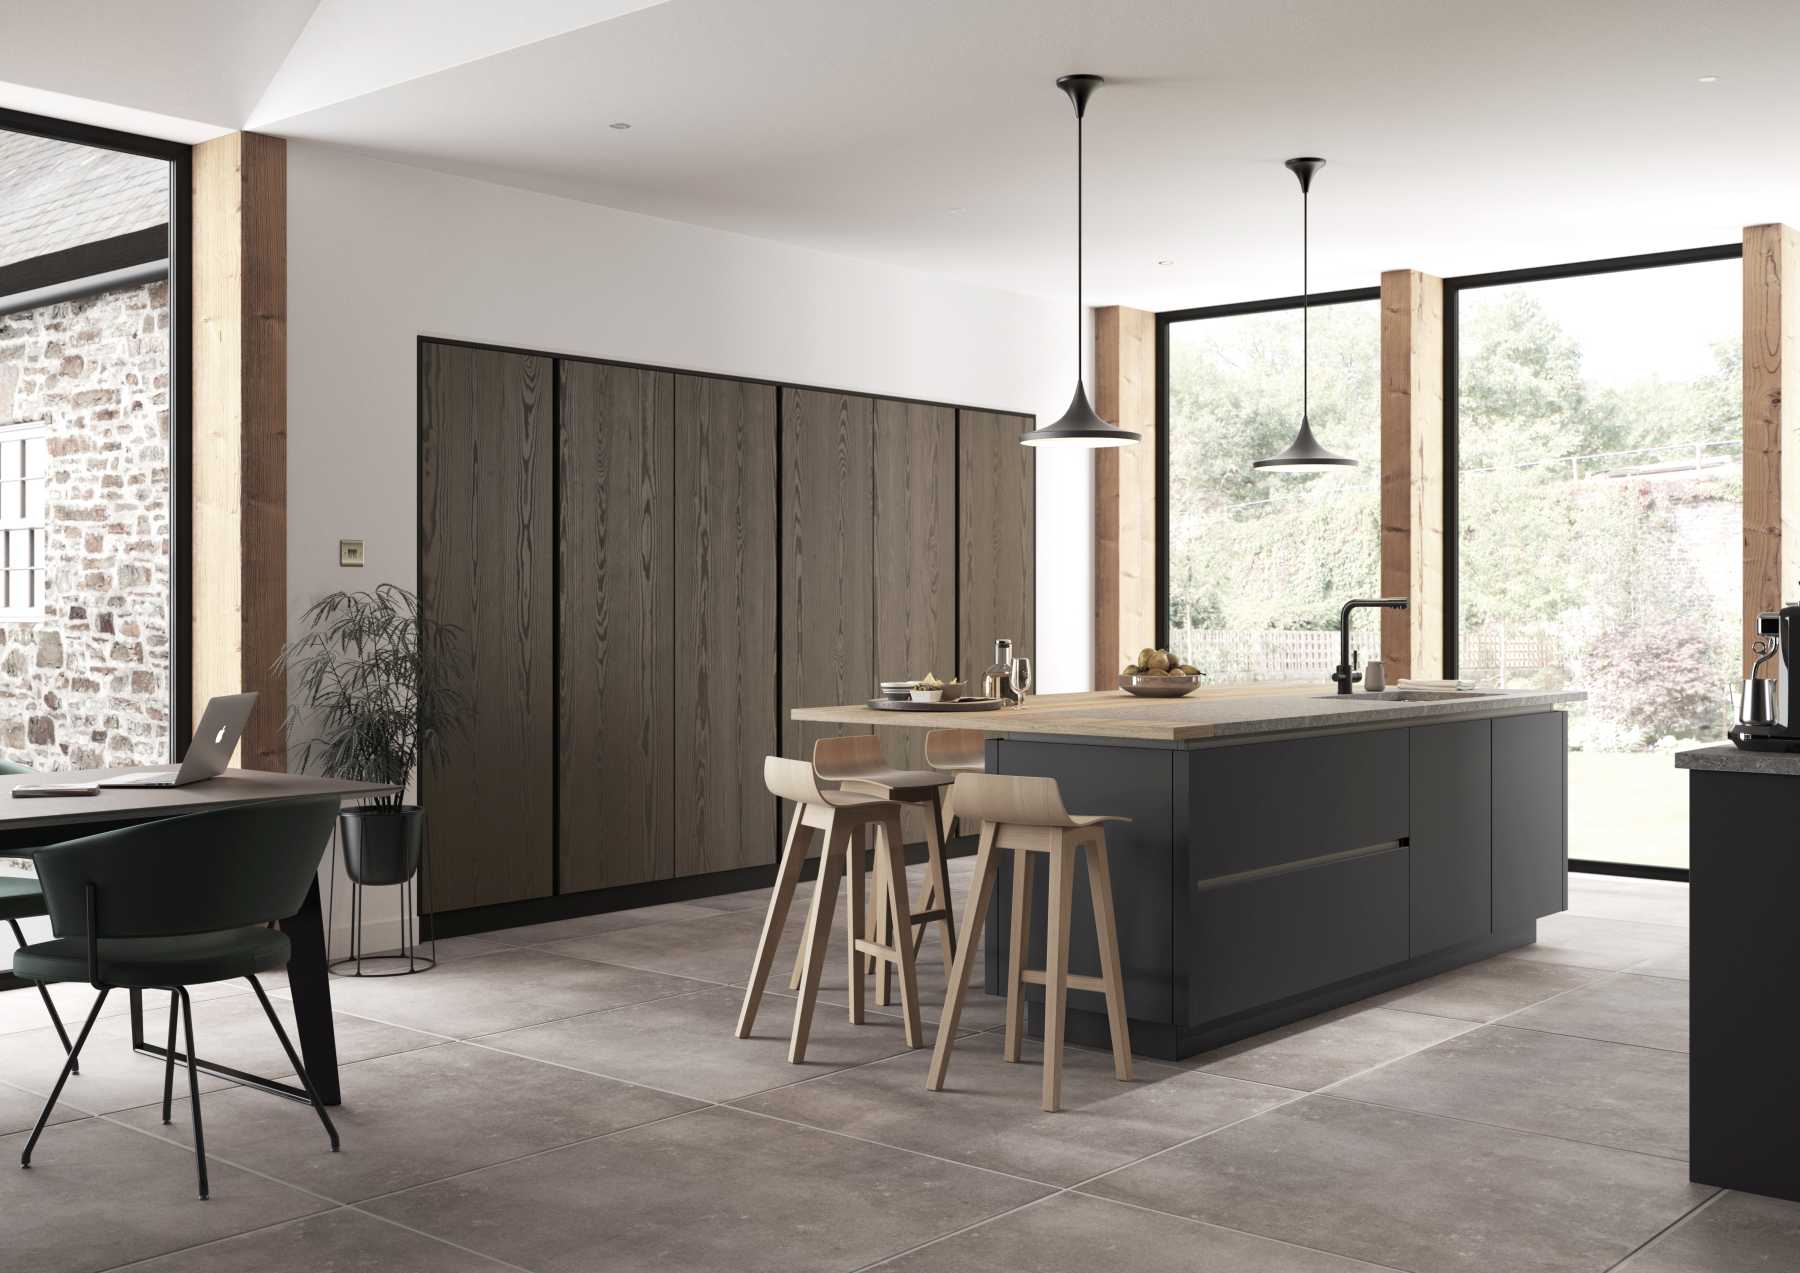 true handleless kitchen with truffle grey and graphite doors and trims